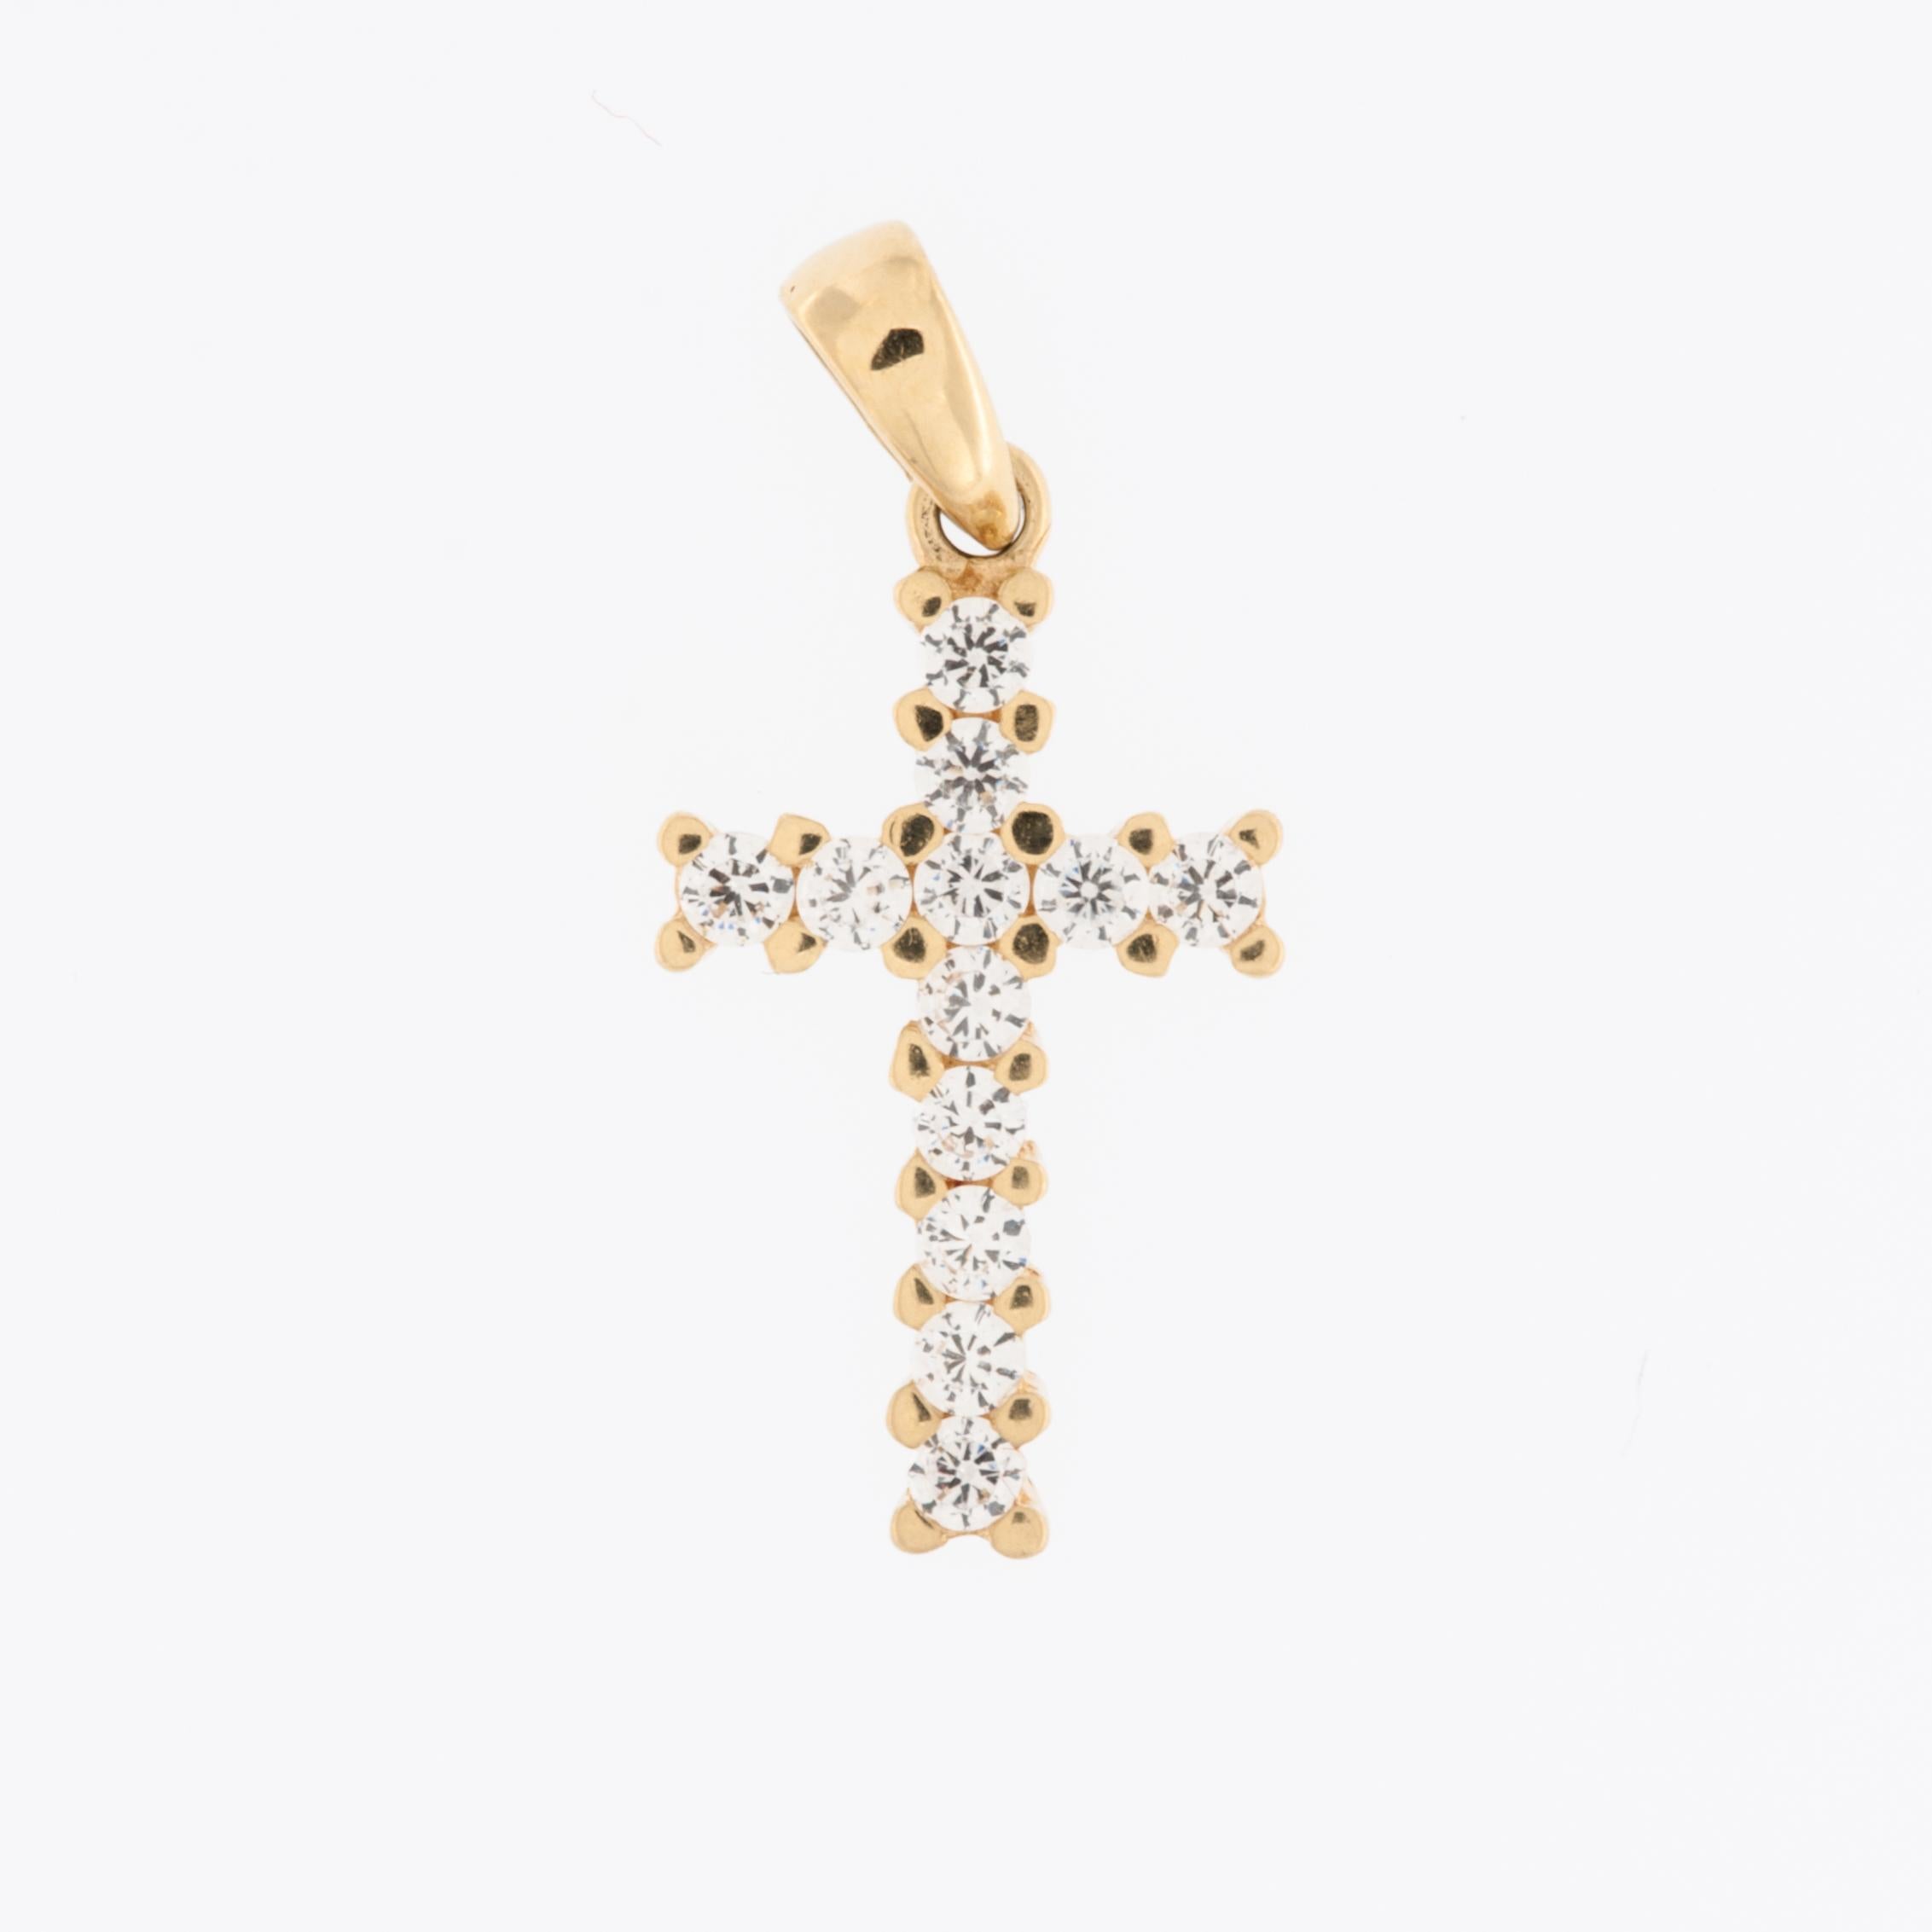 The Swiss 18kt Yellow Gold Cross with Diamonds in claw setting is a luxurious and elegant piece of jewelry. 

The cross is crafted from 18kt yellow gold, known for its rich and warm hue. This high-quality gold is prized for its durability and